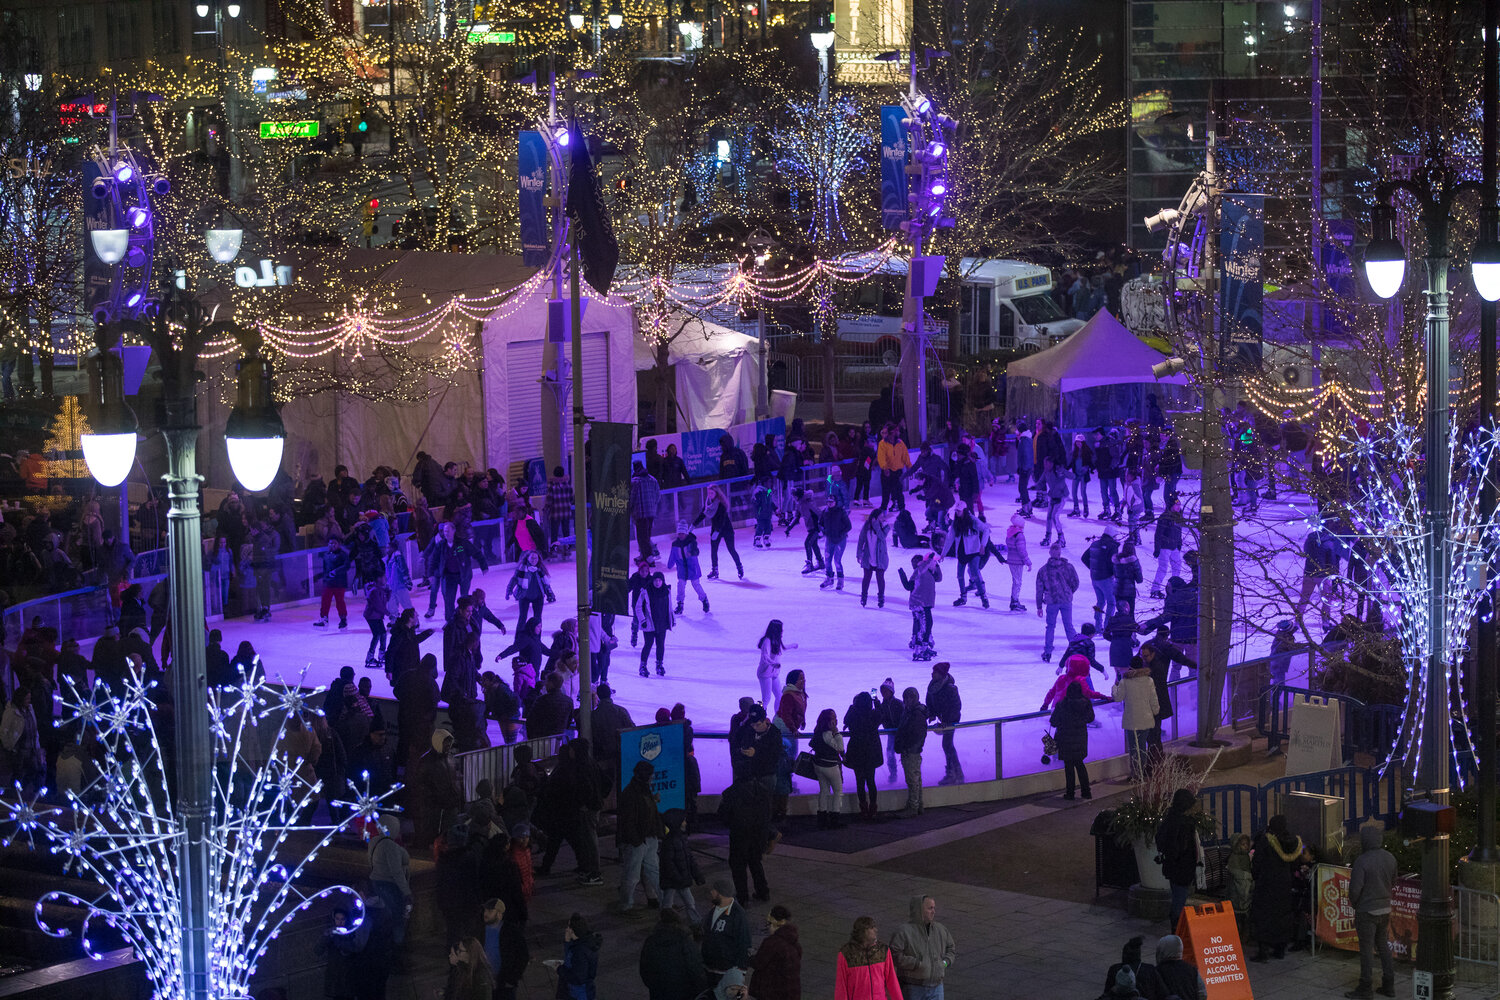 Downtown Royal Oak getting outdoor ice skating rink this weekend, www